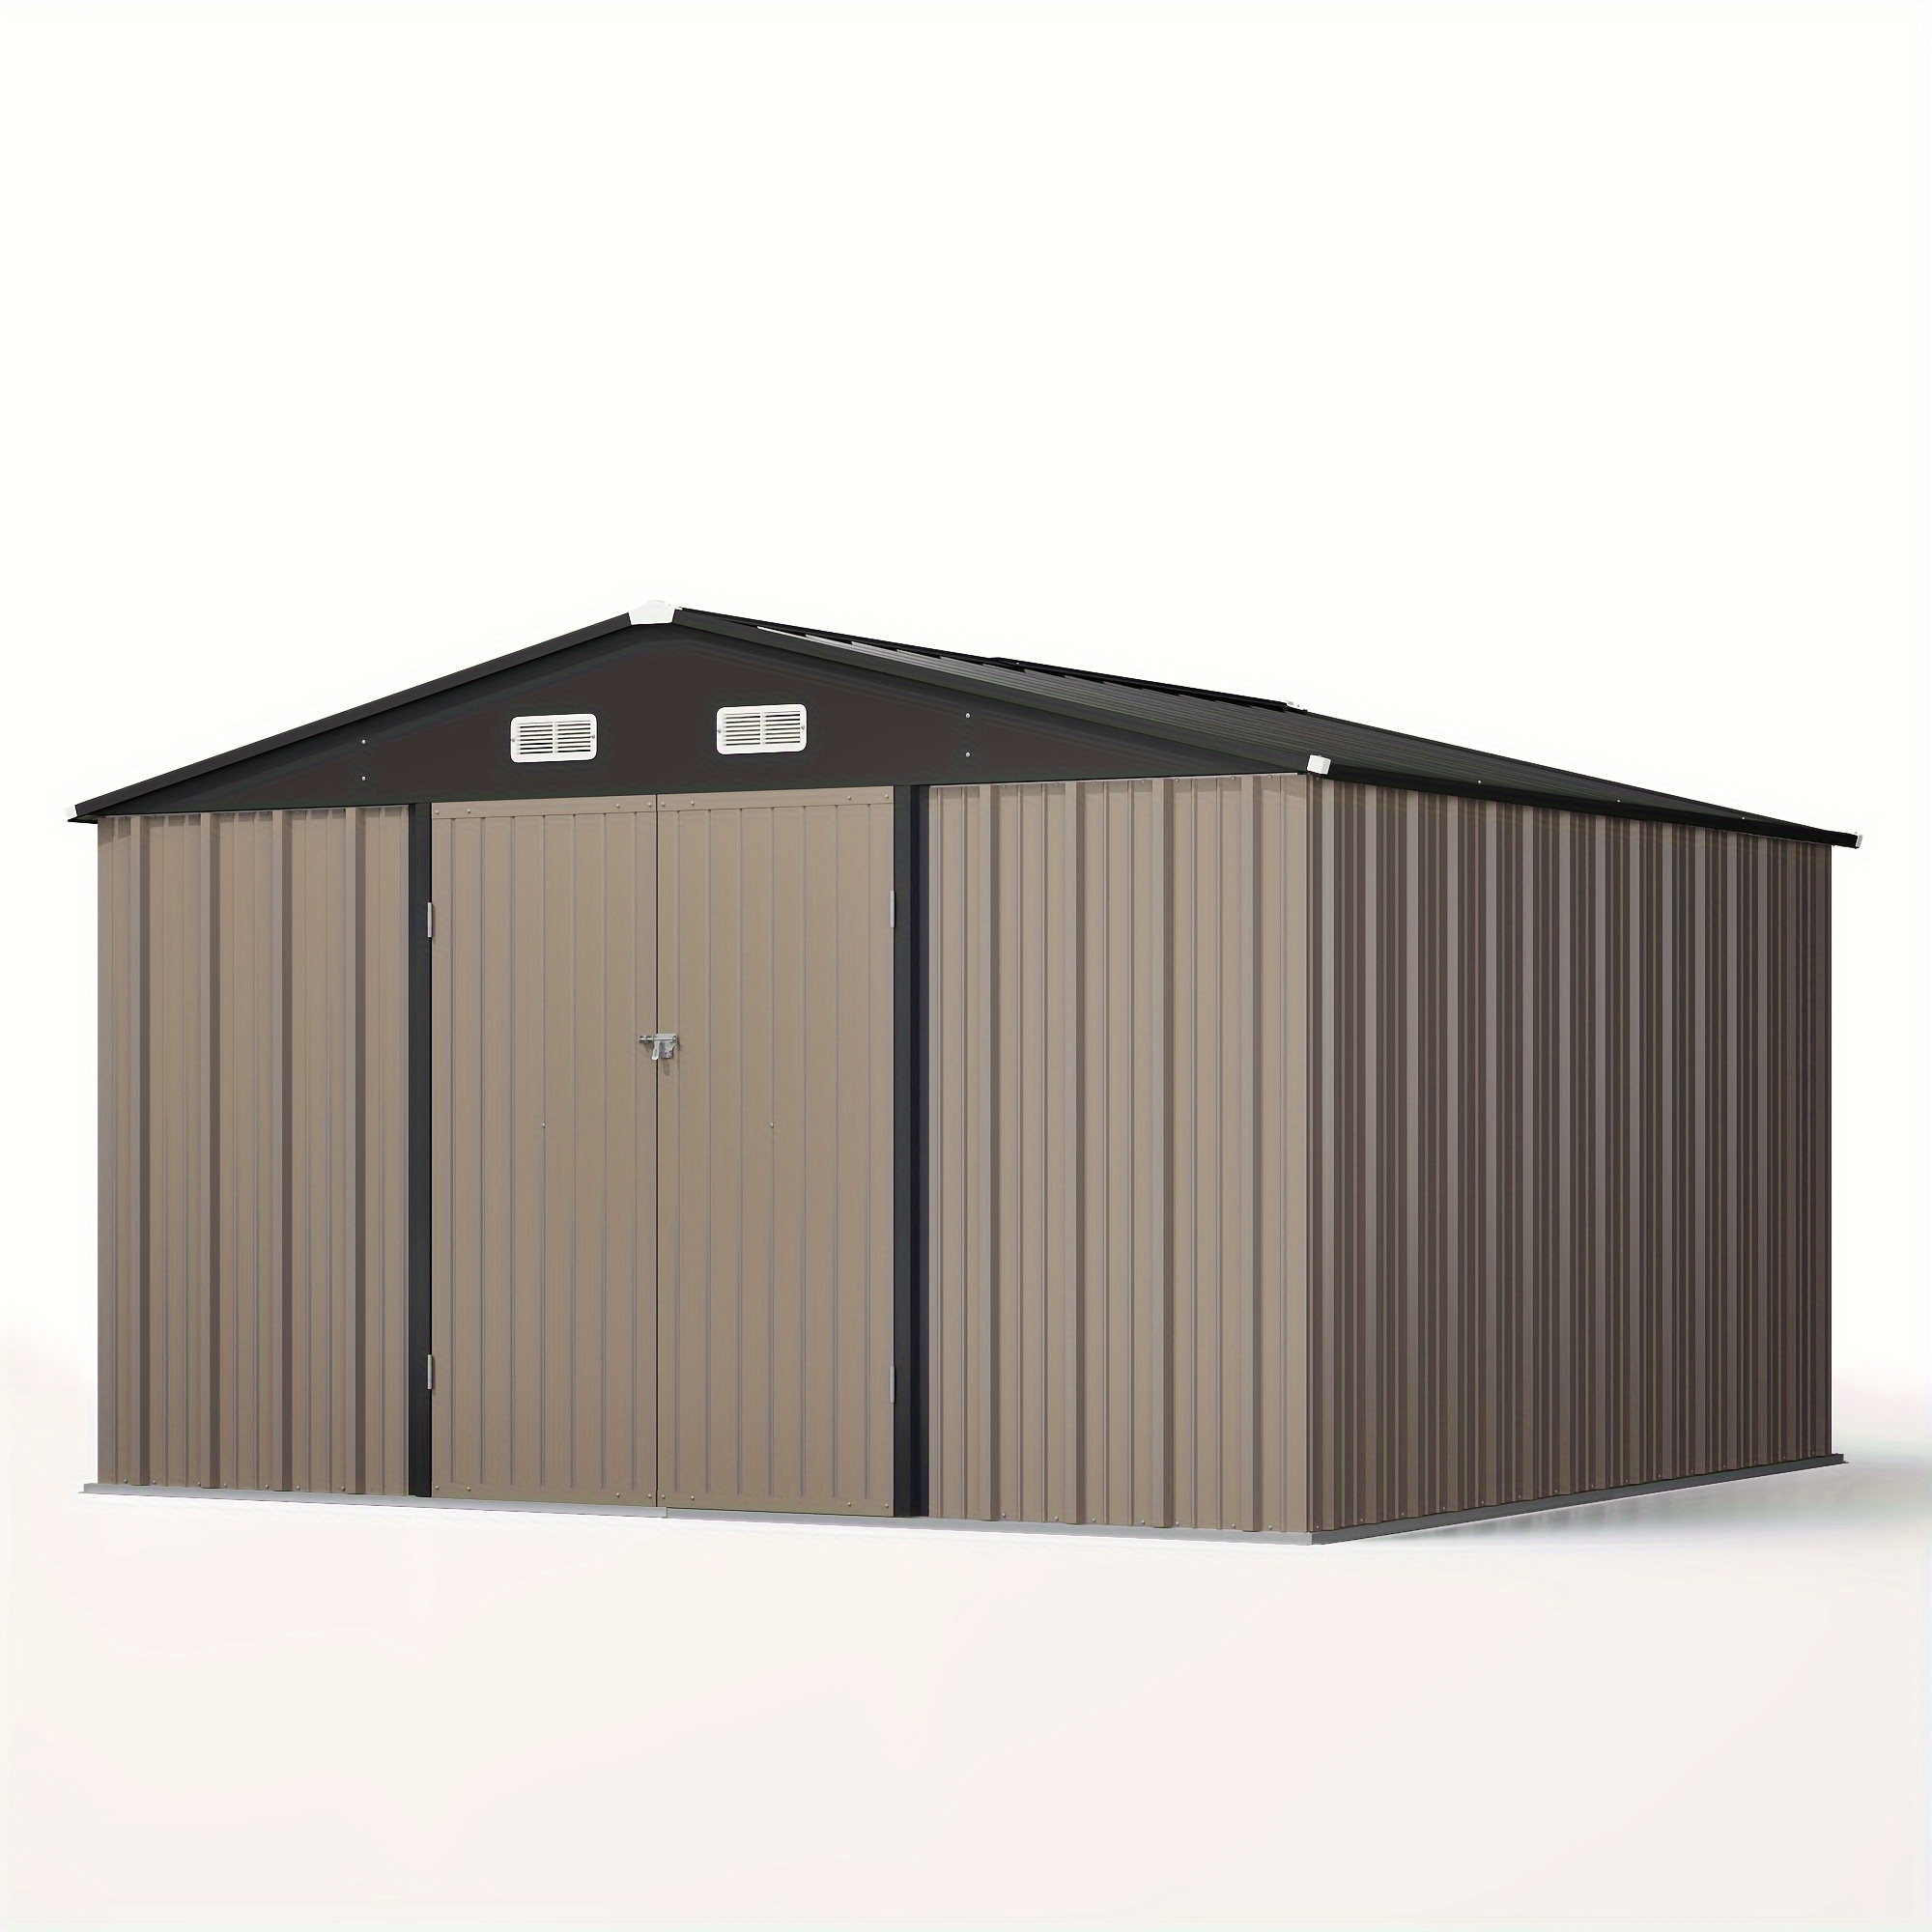 

10x10 Ft Outdoor Storage Shed, Large Metal Steel Utility Tool Shed Storage House With Lockable Door, Garden Tool Shed For Backyard Garden Patio Lawn